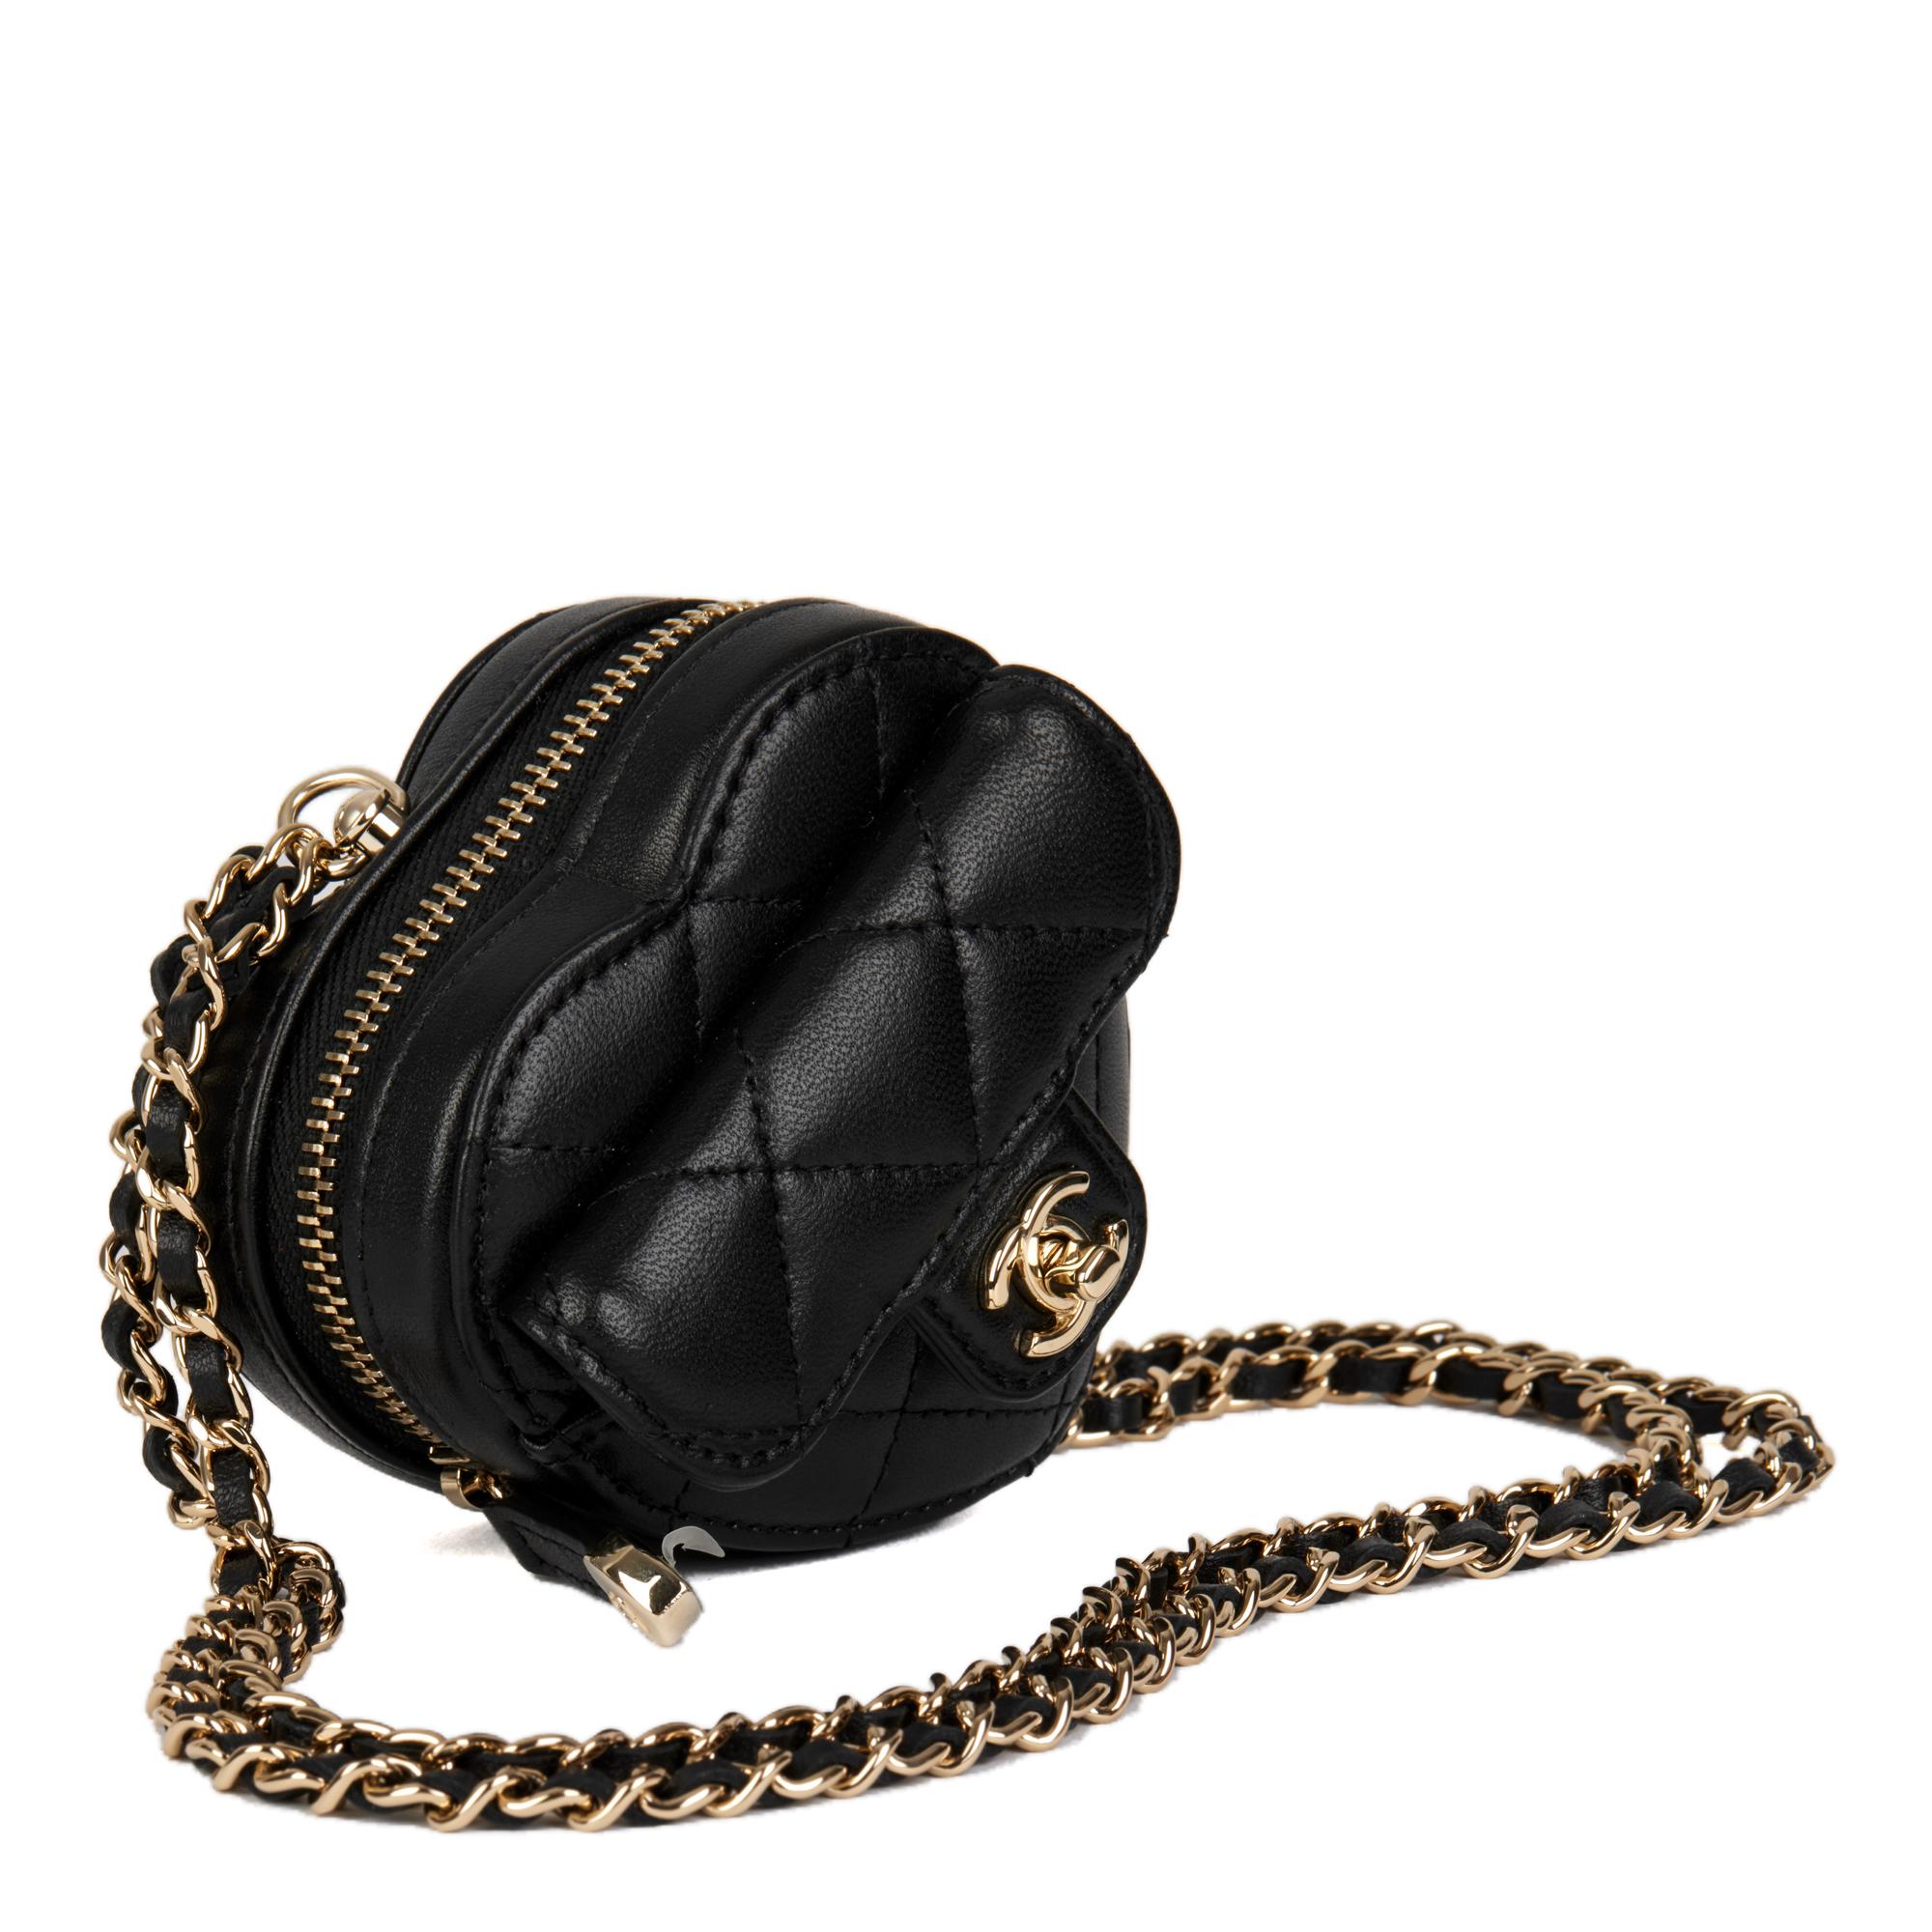 Chanel 2022 Large CC In Love Heart Bag – LuxryEdition